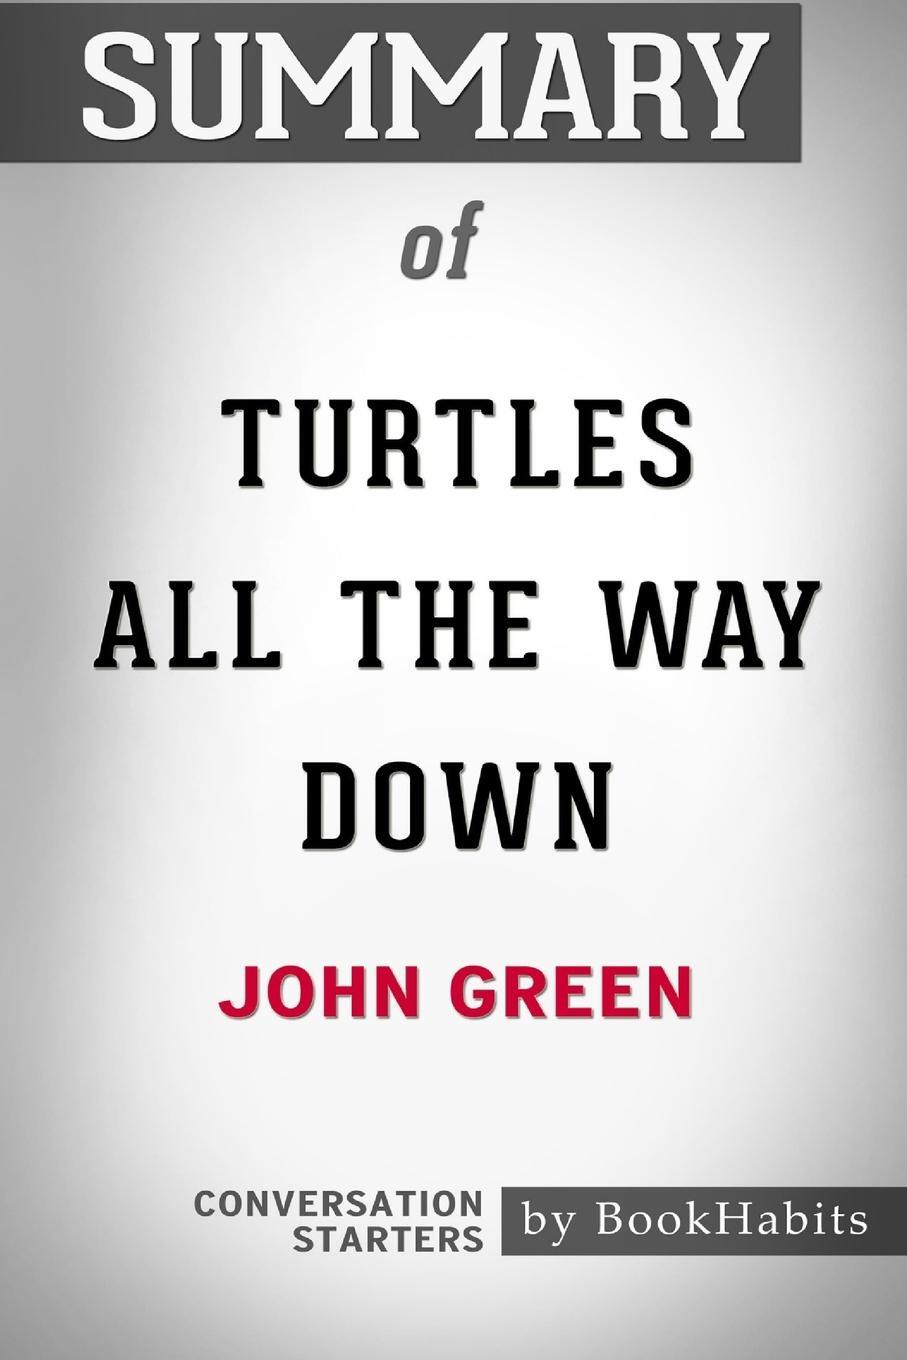 фото Summary of Turtles All the Way Down by John Green. Conversation Starters